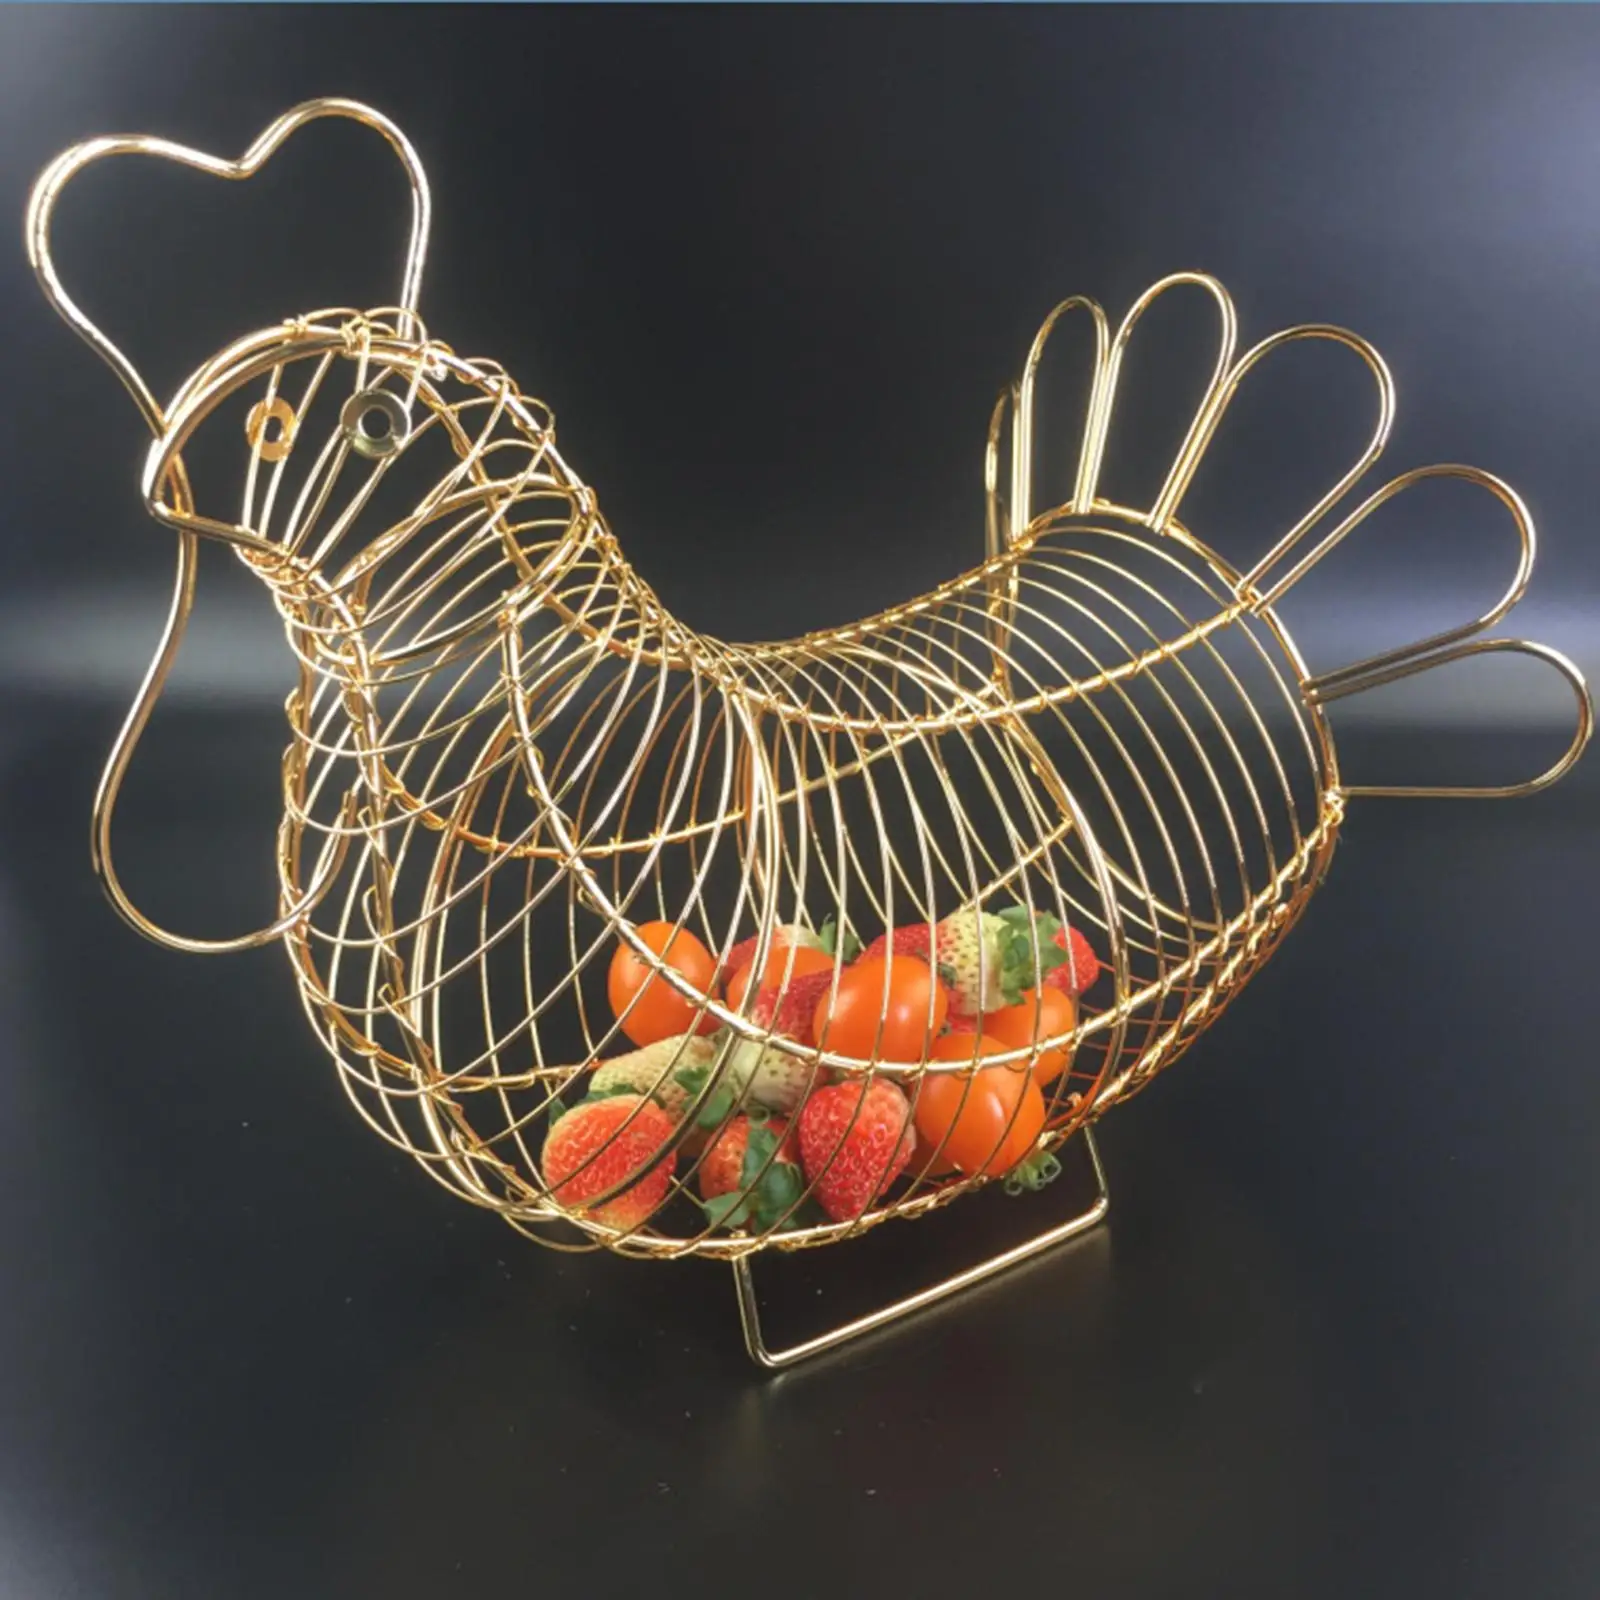 Metal Wire Egg Basket Rustic Multipurpose Decorative Chicken Shaped Egg Basket for Easter Restaurant Pantry Countertop Farmhouse